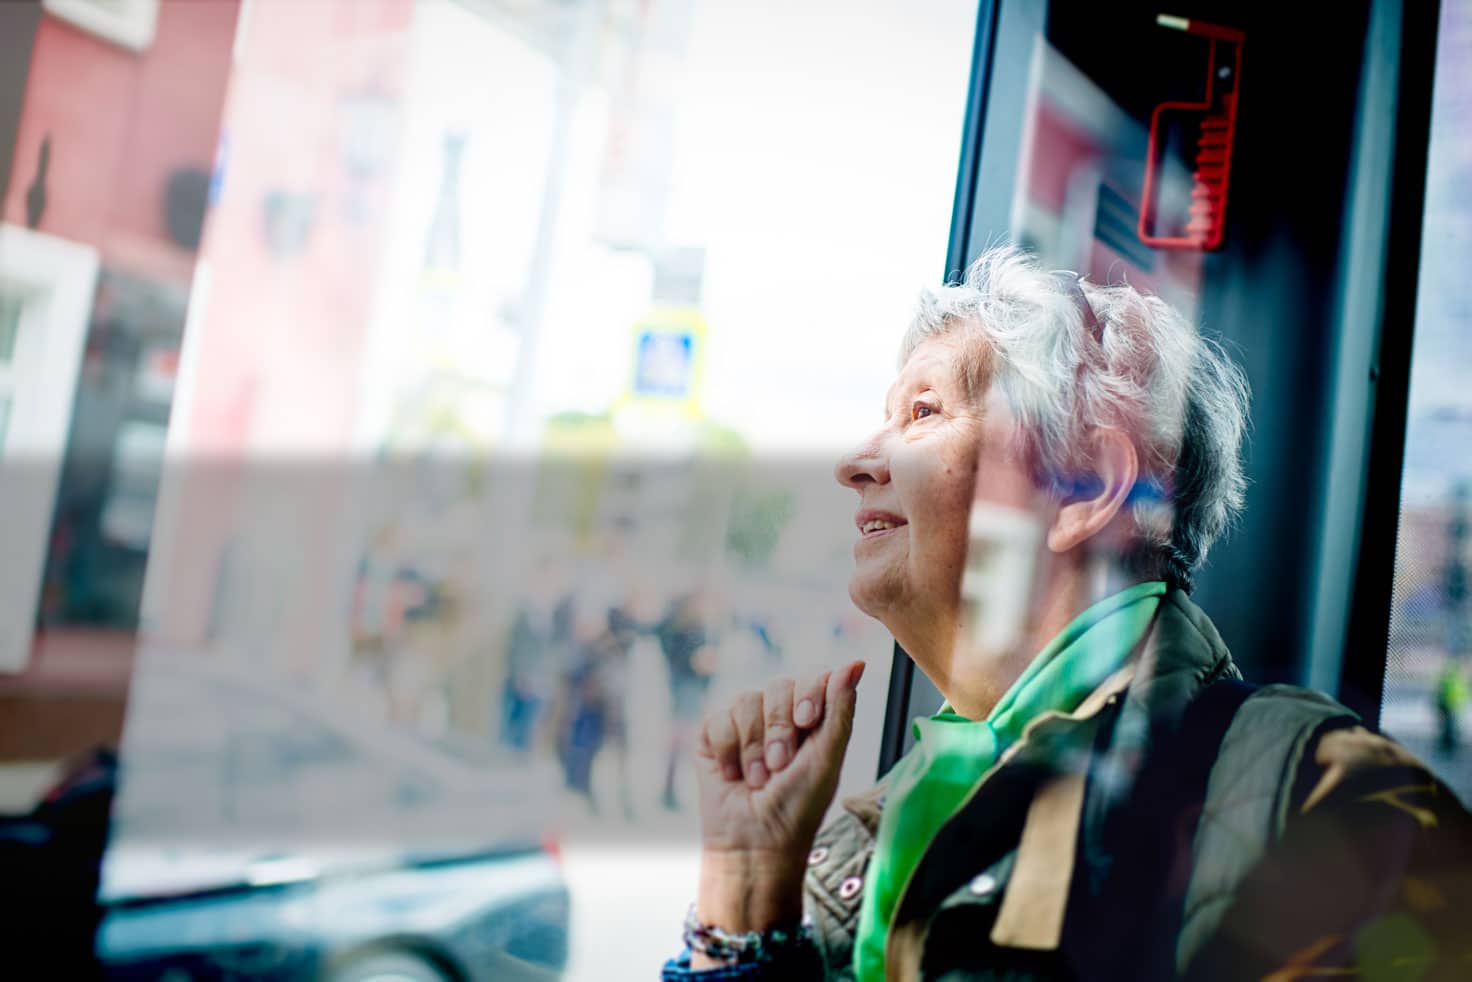 Senior woman sitting on a bus looking out of the window smiling